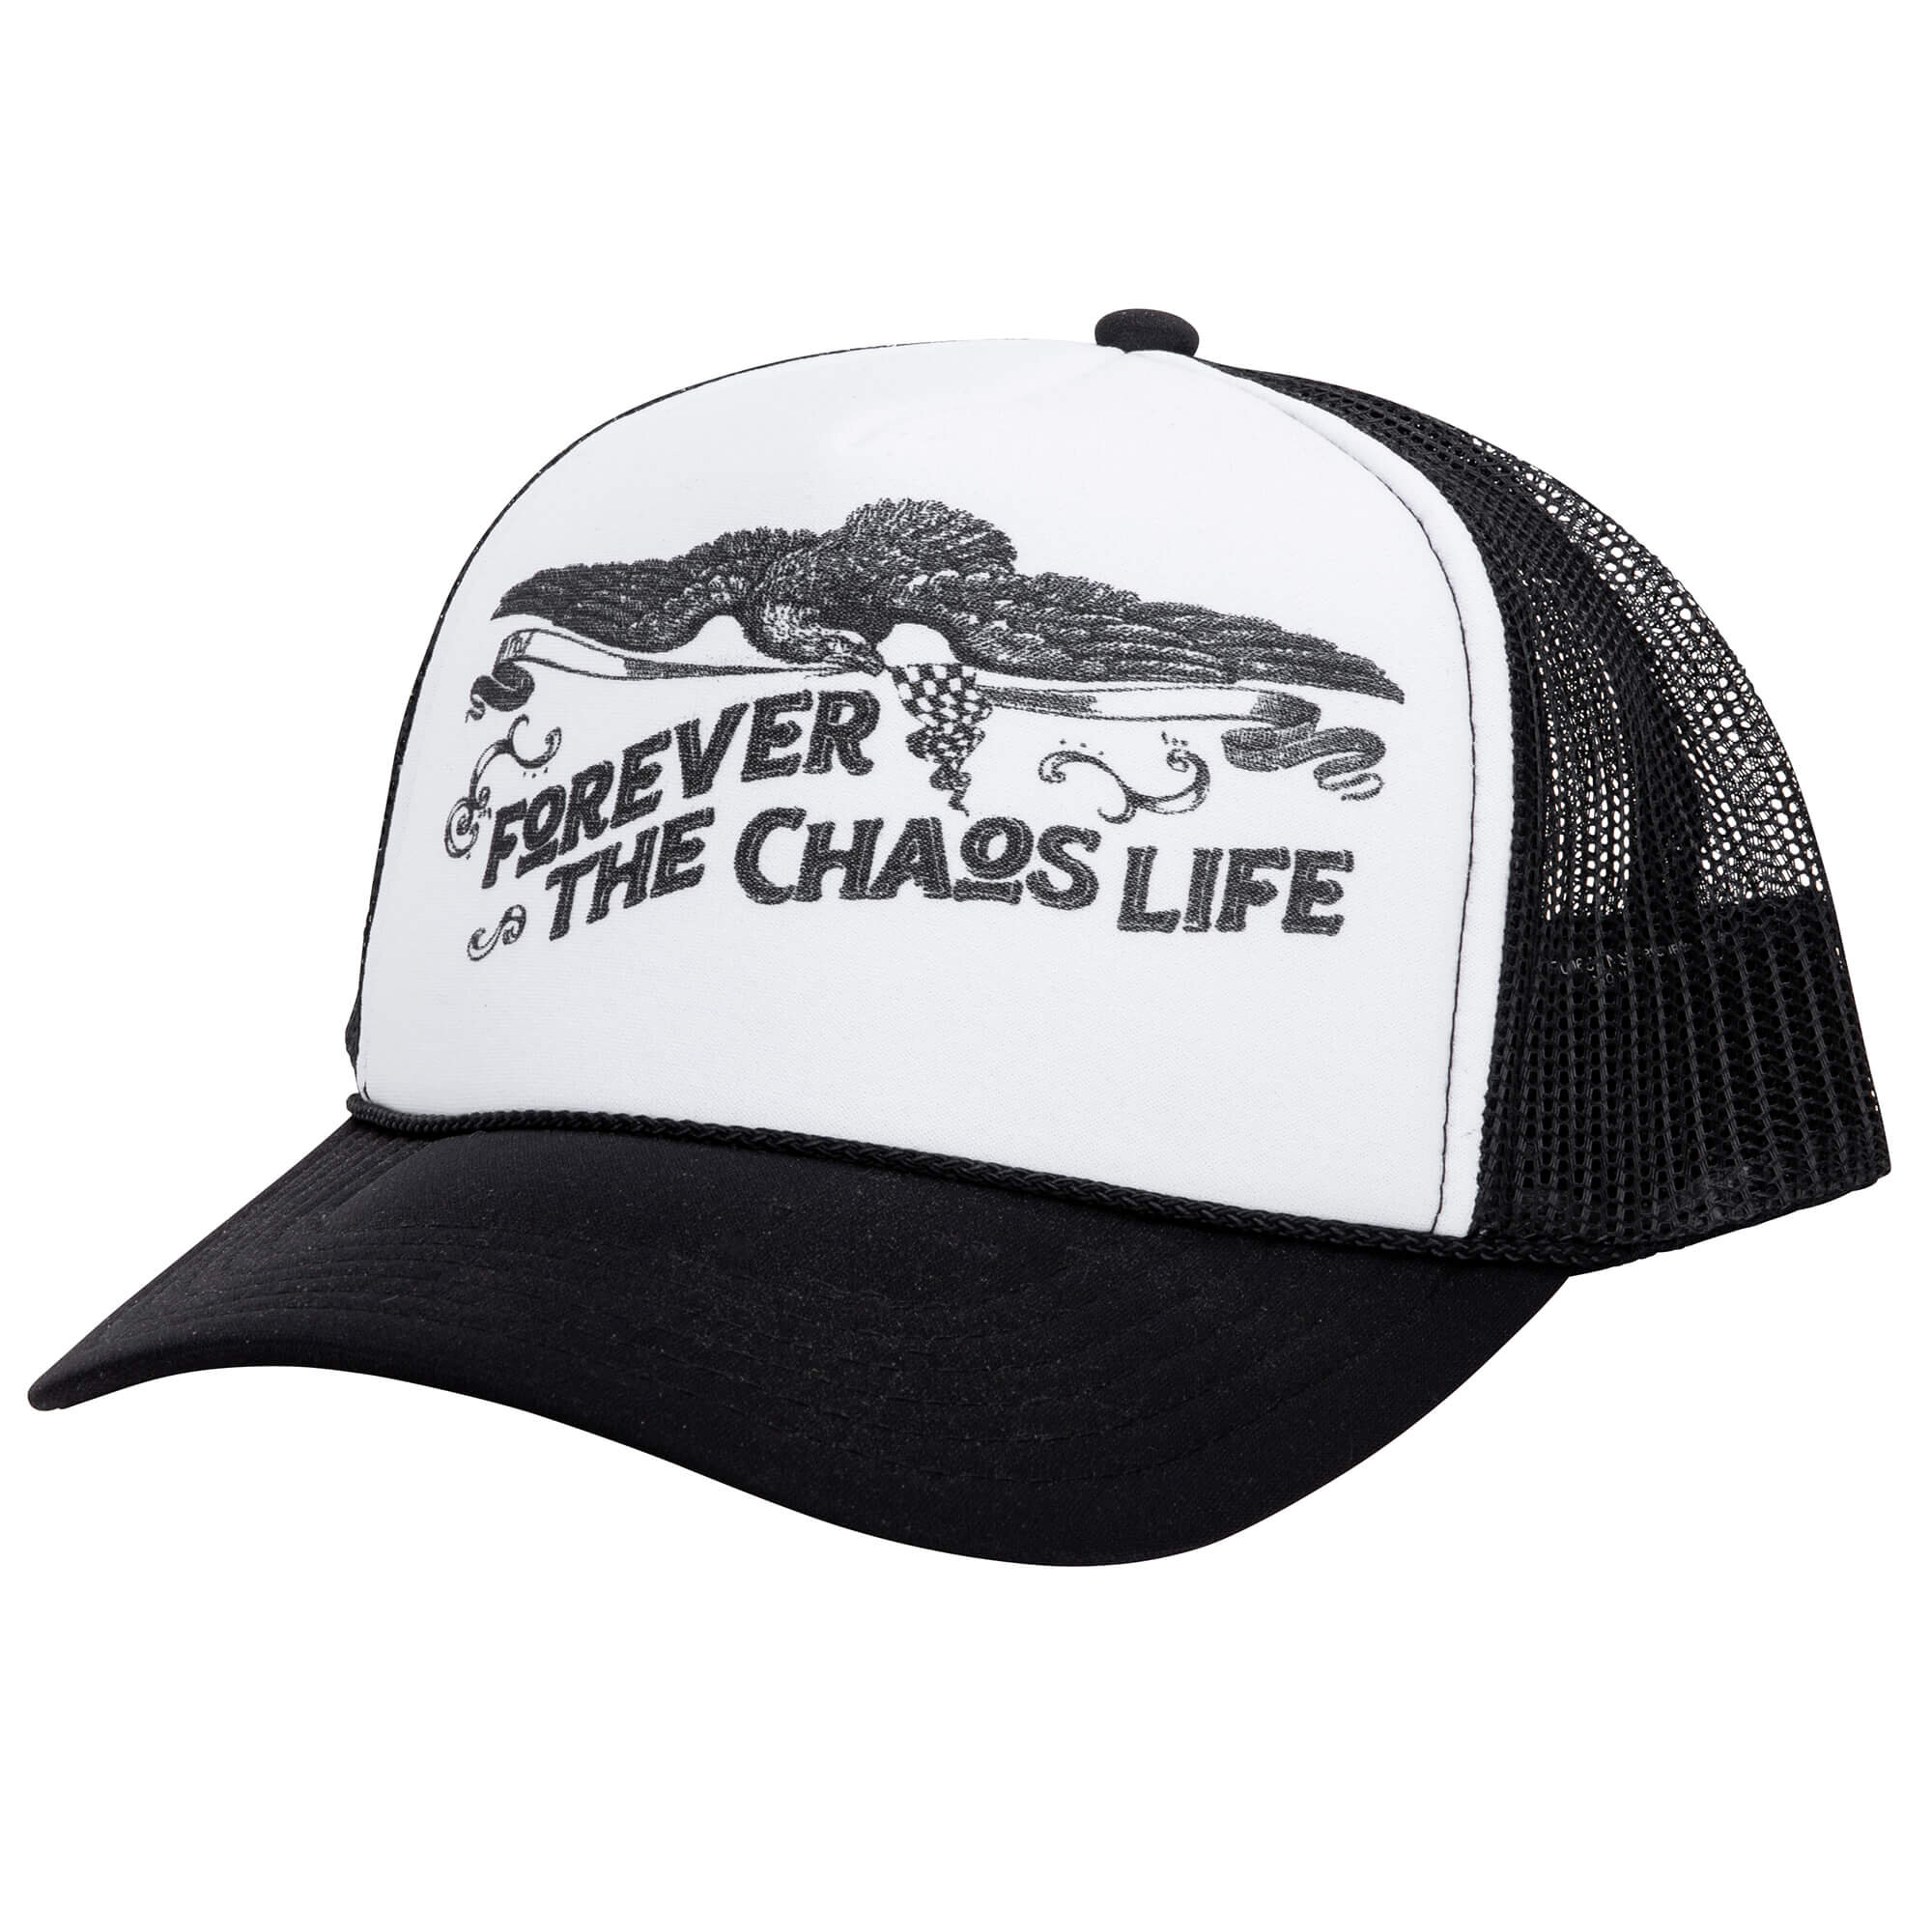 CHAOS - Otto Trucker & — FOREVER FTCL Hat LIFE White THE Racing Black